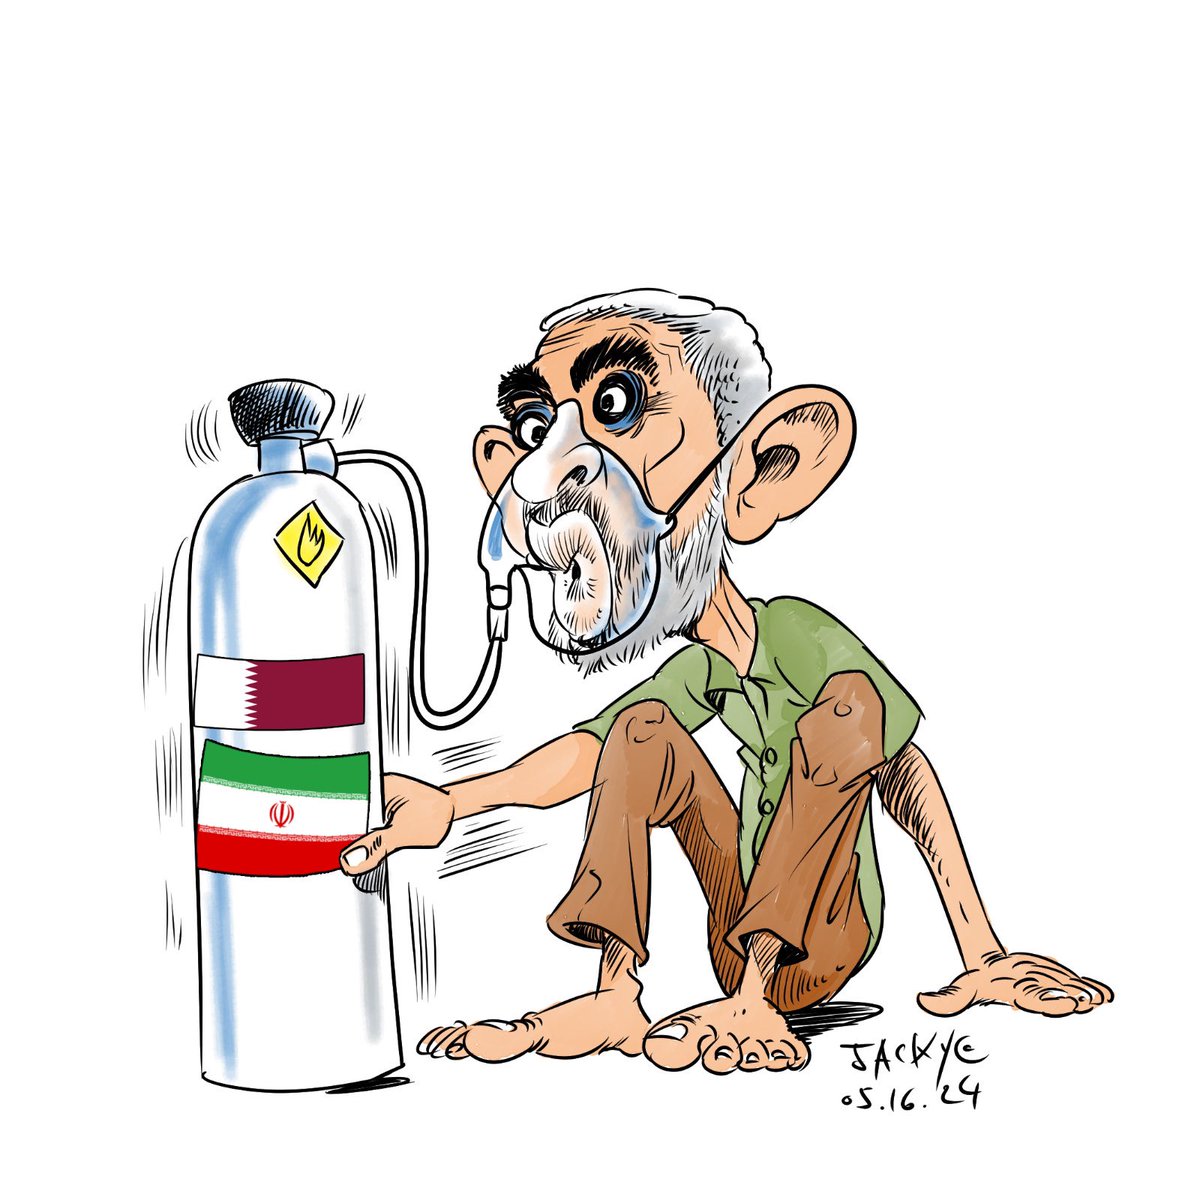 Qatar and Iran are the oxygen that keeps Hamas alive!

[Artist: @YarhiJacky @bararit]